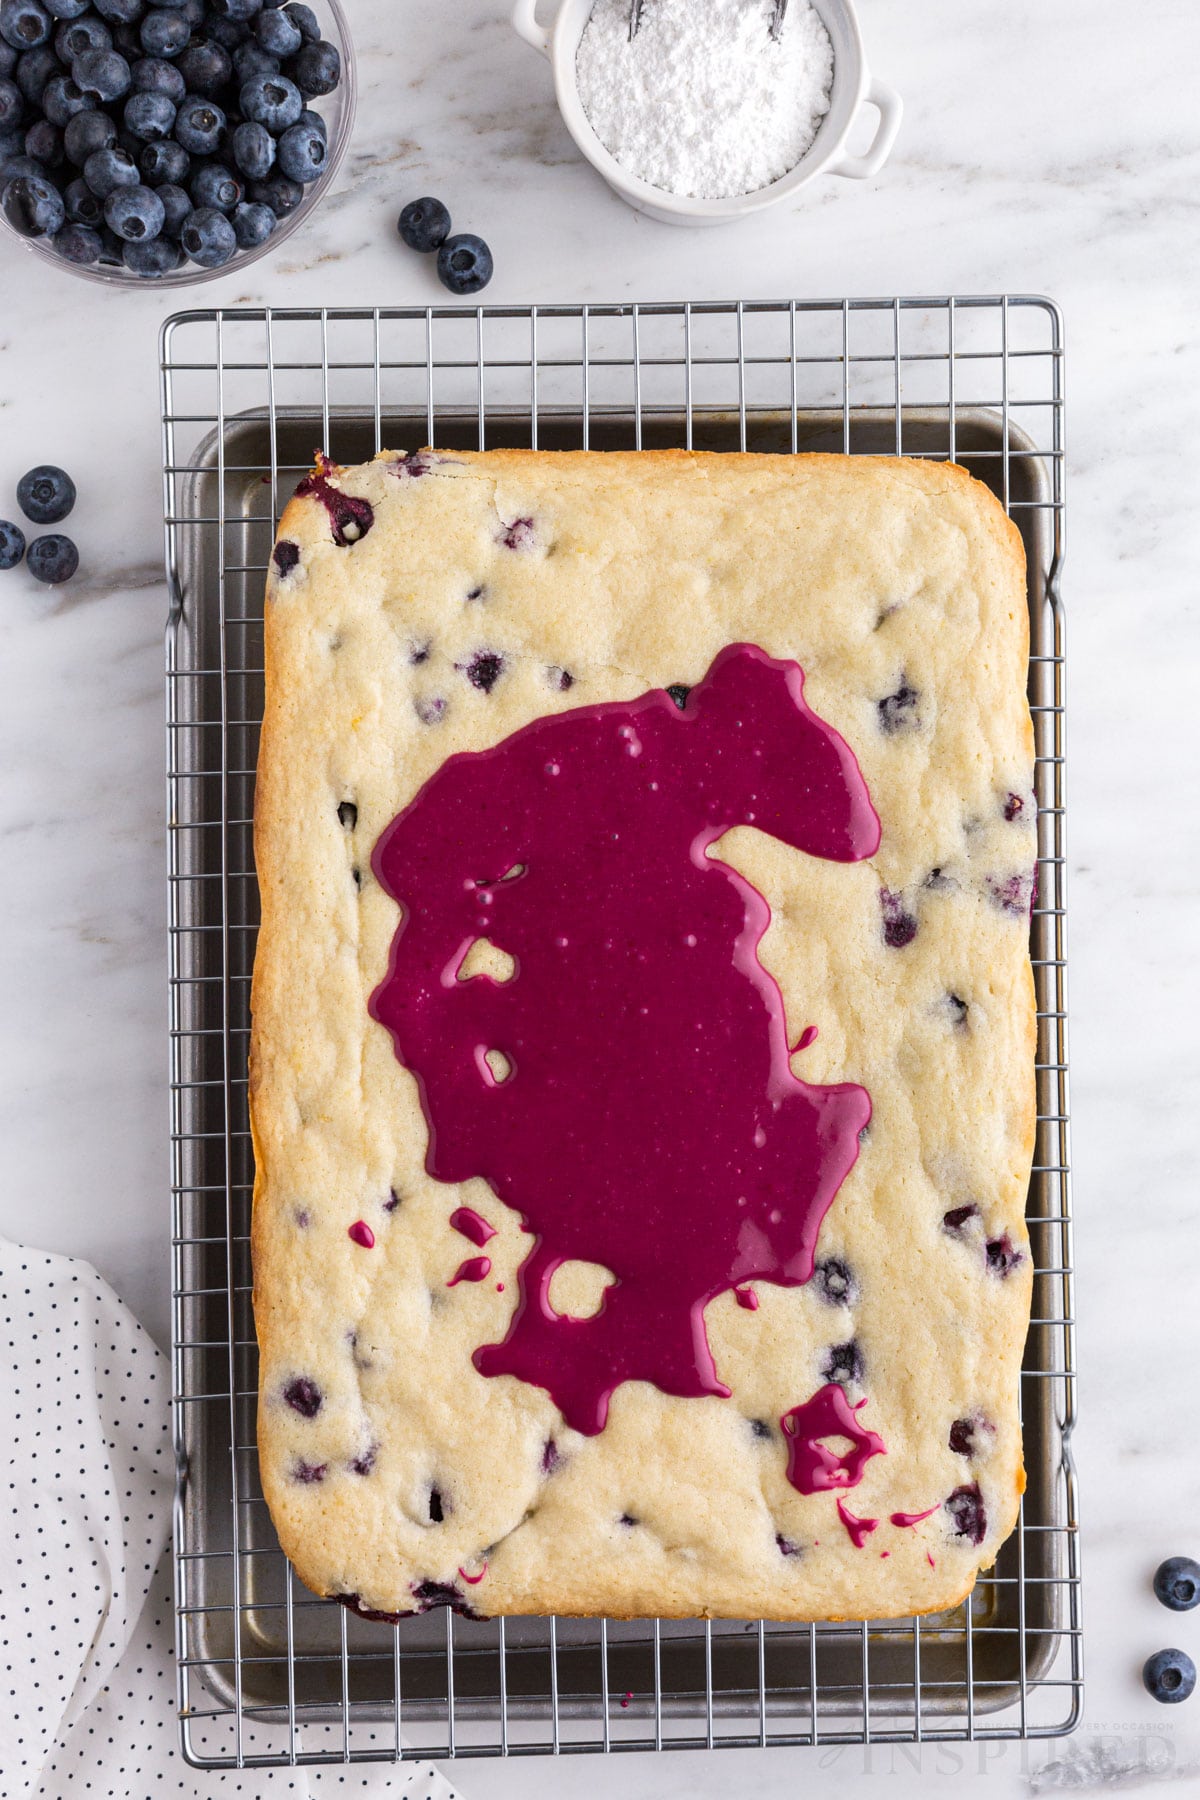 Baked blueberry lemon blondies on a wire cooling rack with metal tray underneath, blueberry glaze poured onto top of blondies, polka dot linen, on a white marble surface.